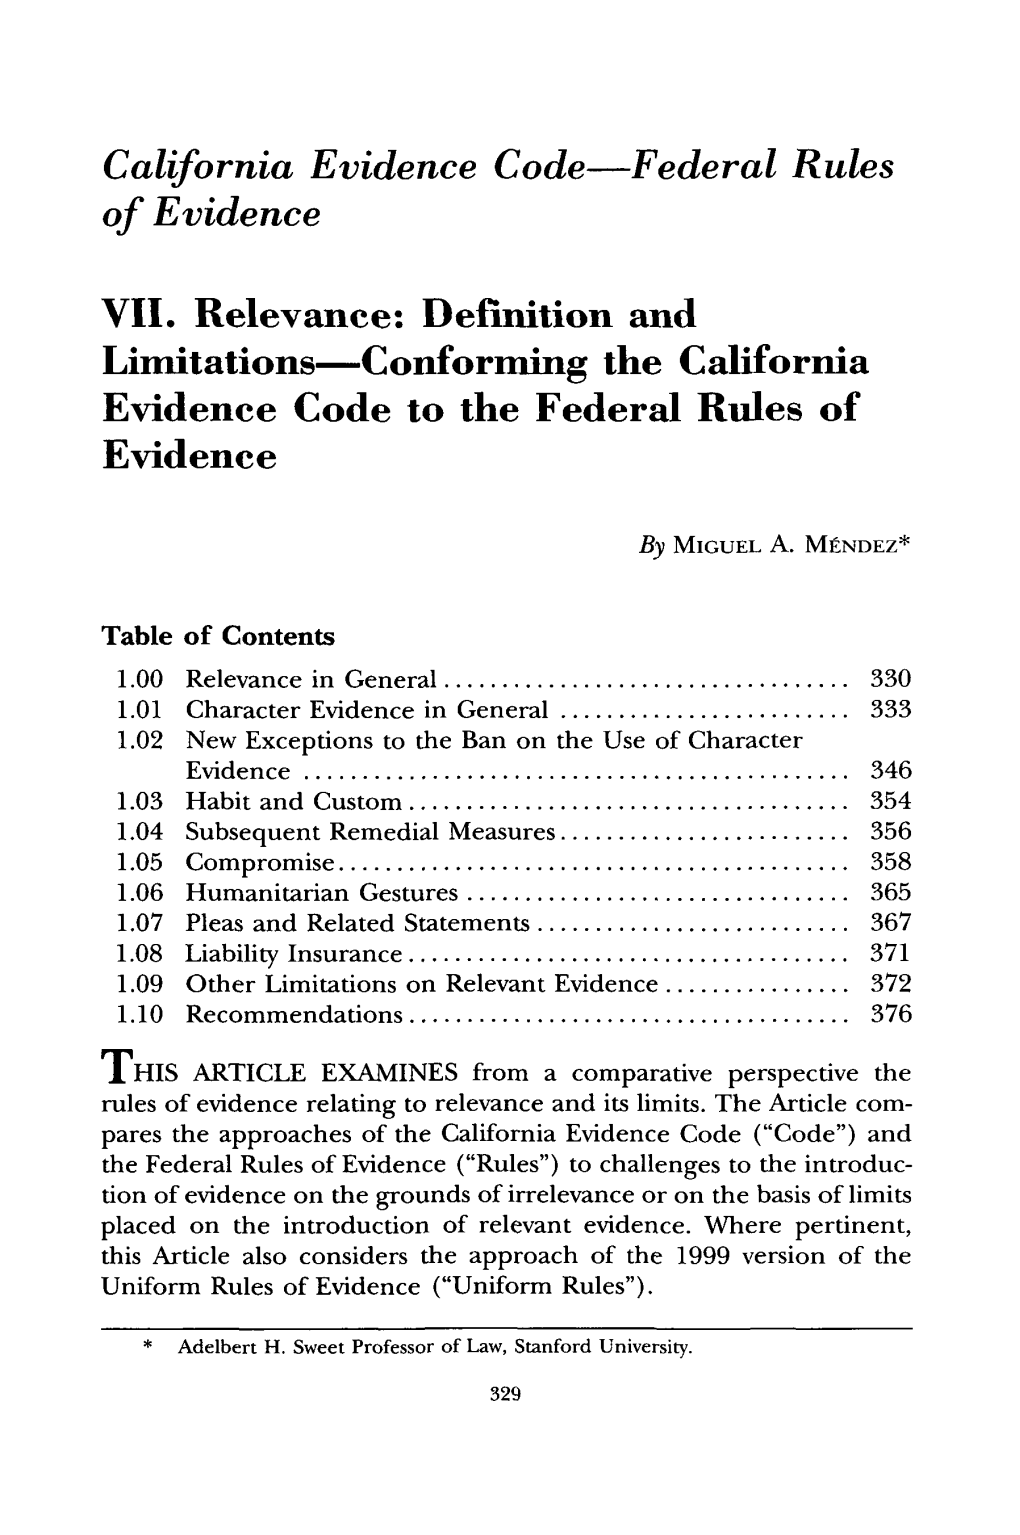 Definition and Limitations-Conforming the California Evidence Code to the Federal Rules of Evidence